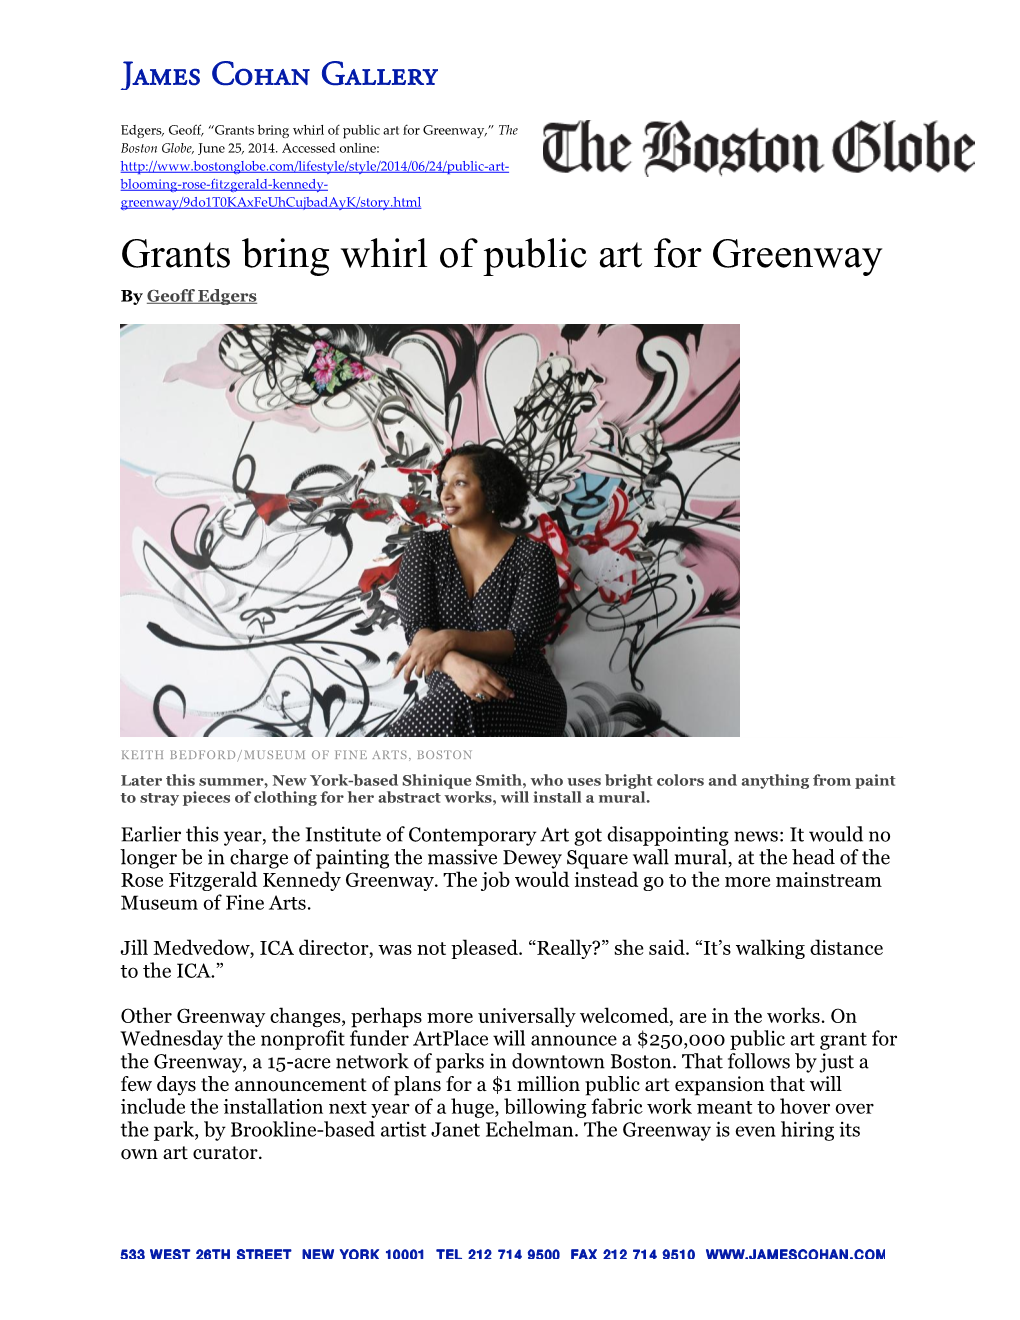 Grants Bring Whirl of Public Art for Greenway,” the Boston Globe, June 25, 2014